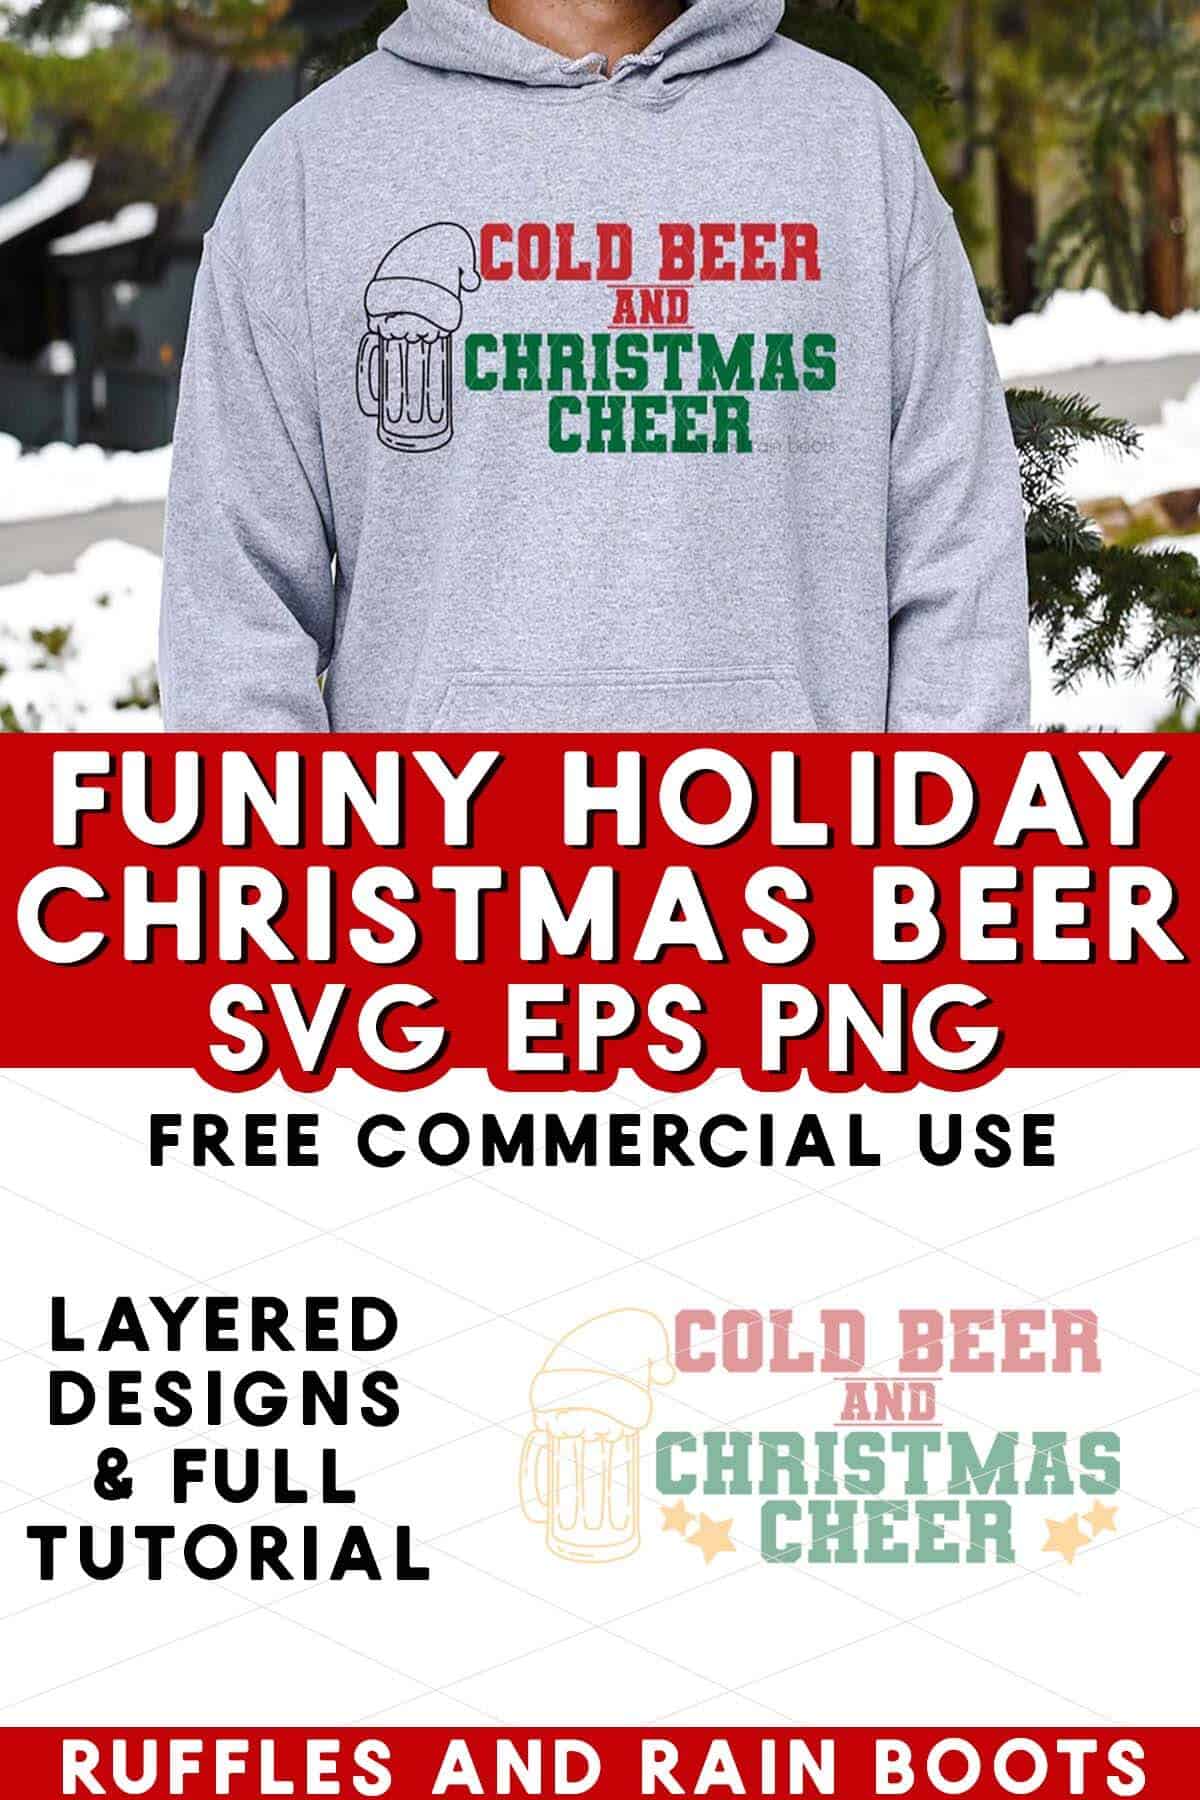 Vertical image showing man outside in the snow in a heather gray sweatshirt which reads cold beer and Christmas cheer.